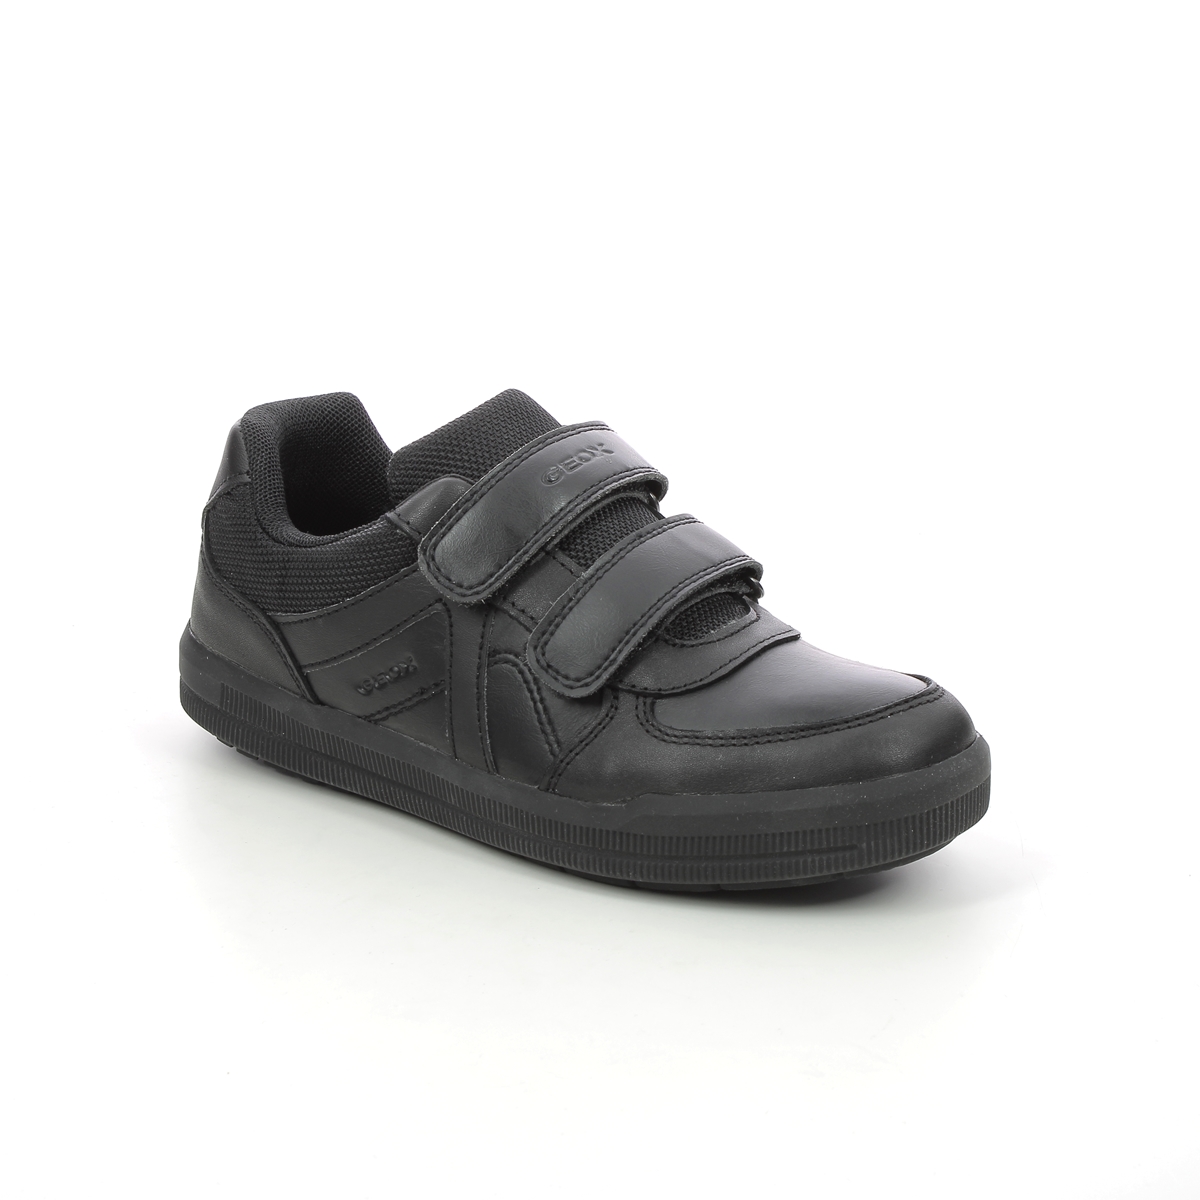 Geox - Arzach Boy Vel (Black Leather) J844Ae-C9999 In Size 37 In Plain Black Leather For School For kids